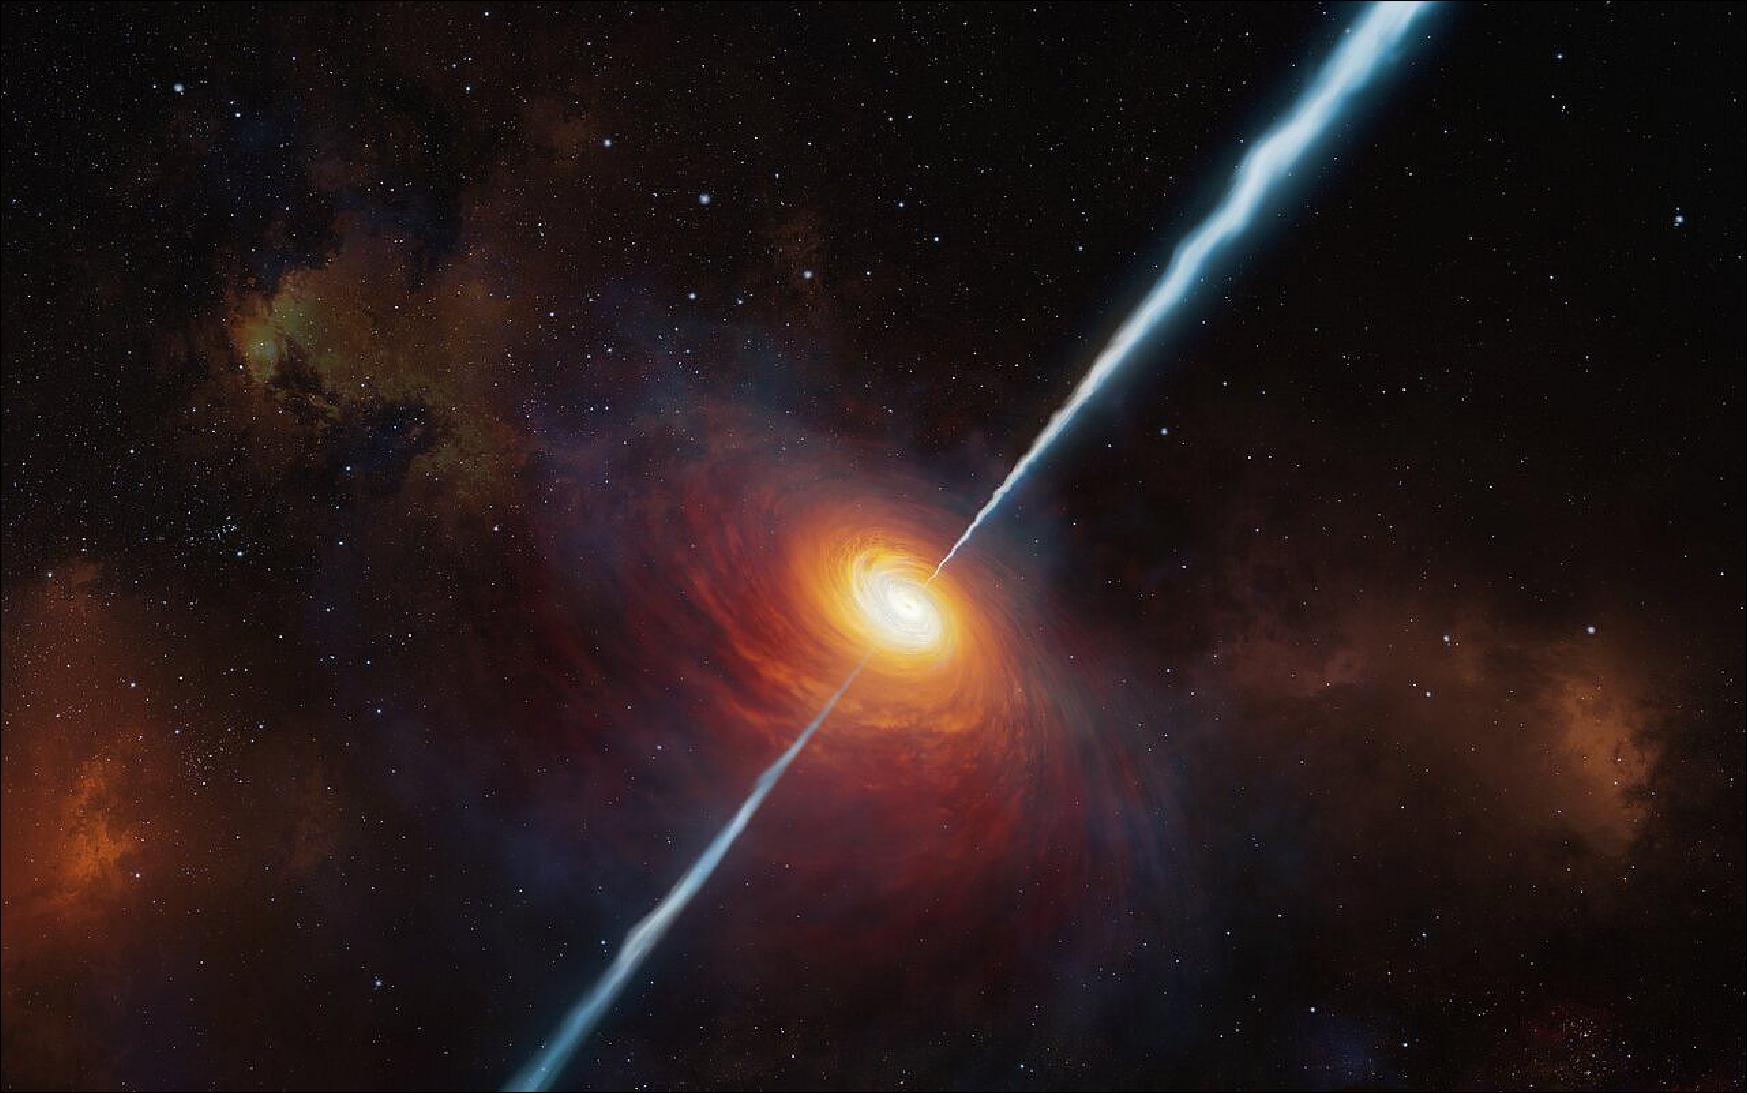 Figure 24: This artist’s impression shows how the distant quasar P172+18 and its radio jets may have looked. To date (early 2021), this is the most distant quasar with radio jets ever found and it was studied with the help of ESO’s Very Large Telescope. It is so distant that light from it has travelled for about 13 billion years to reach us: we see it as it was when the Universe was only about 780 million years old (image credit: ESO, M. Kornmesser)